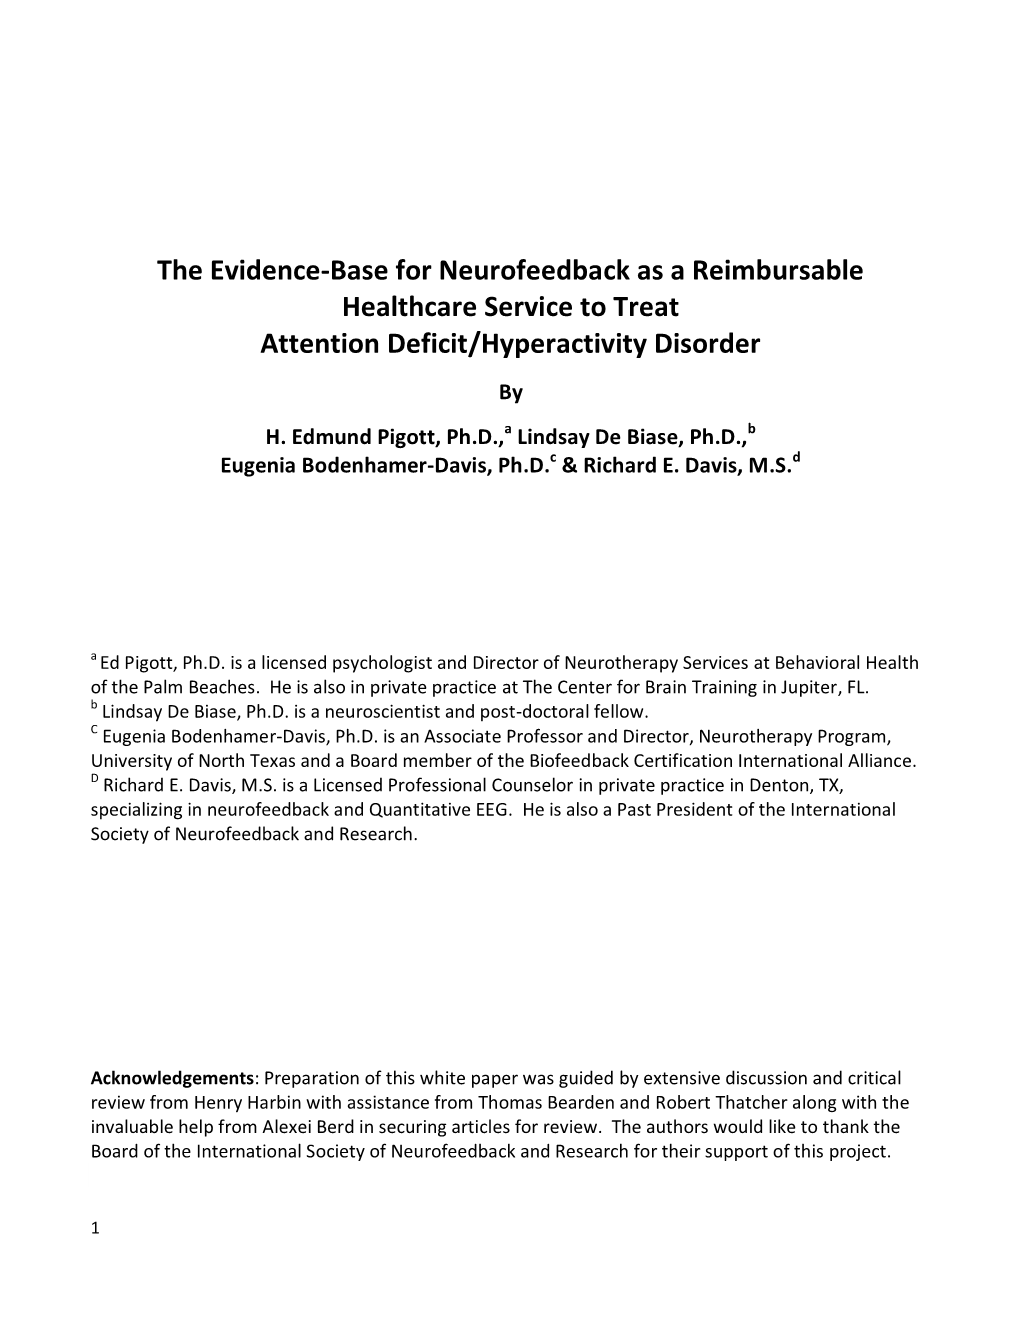 The Evidence-Base for Neurofeedback As a Reimbursable Healthcare Service to Treat Attention Deficit/Hyperactivity Disorder